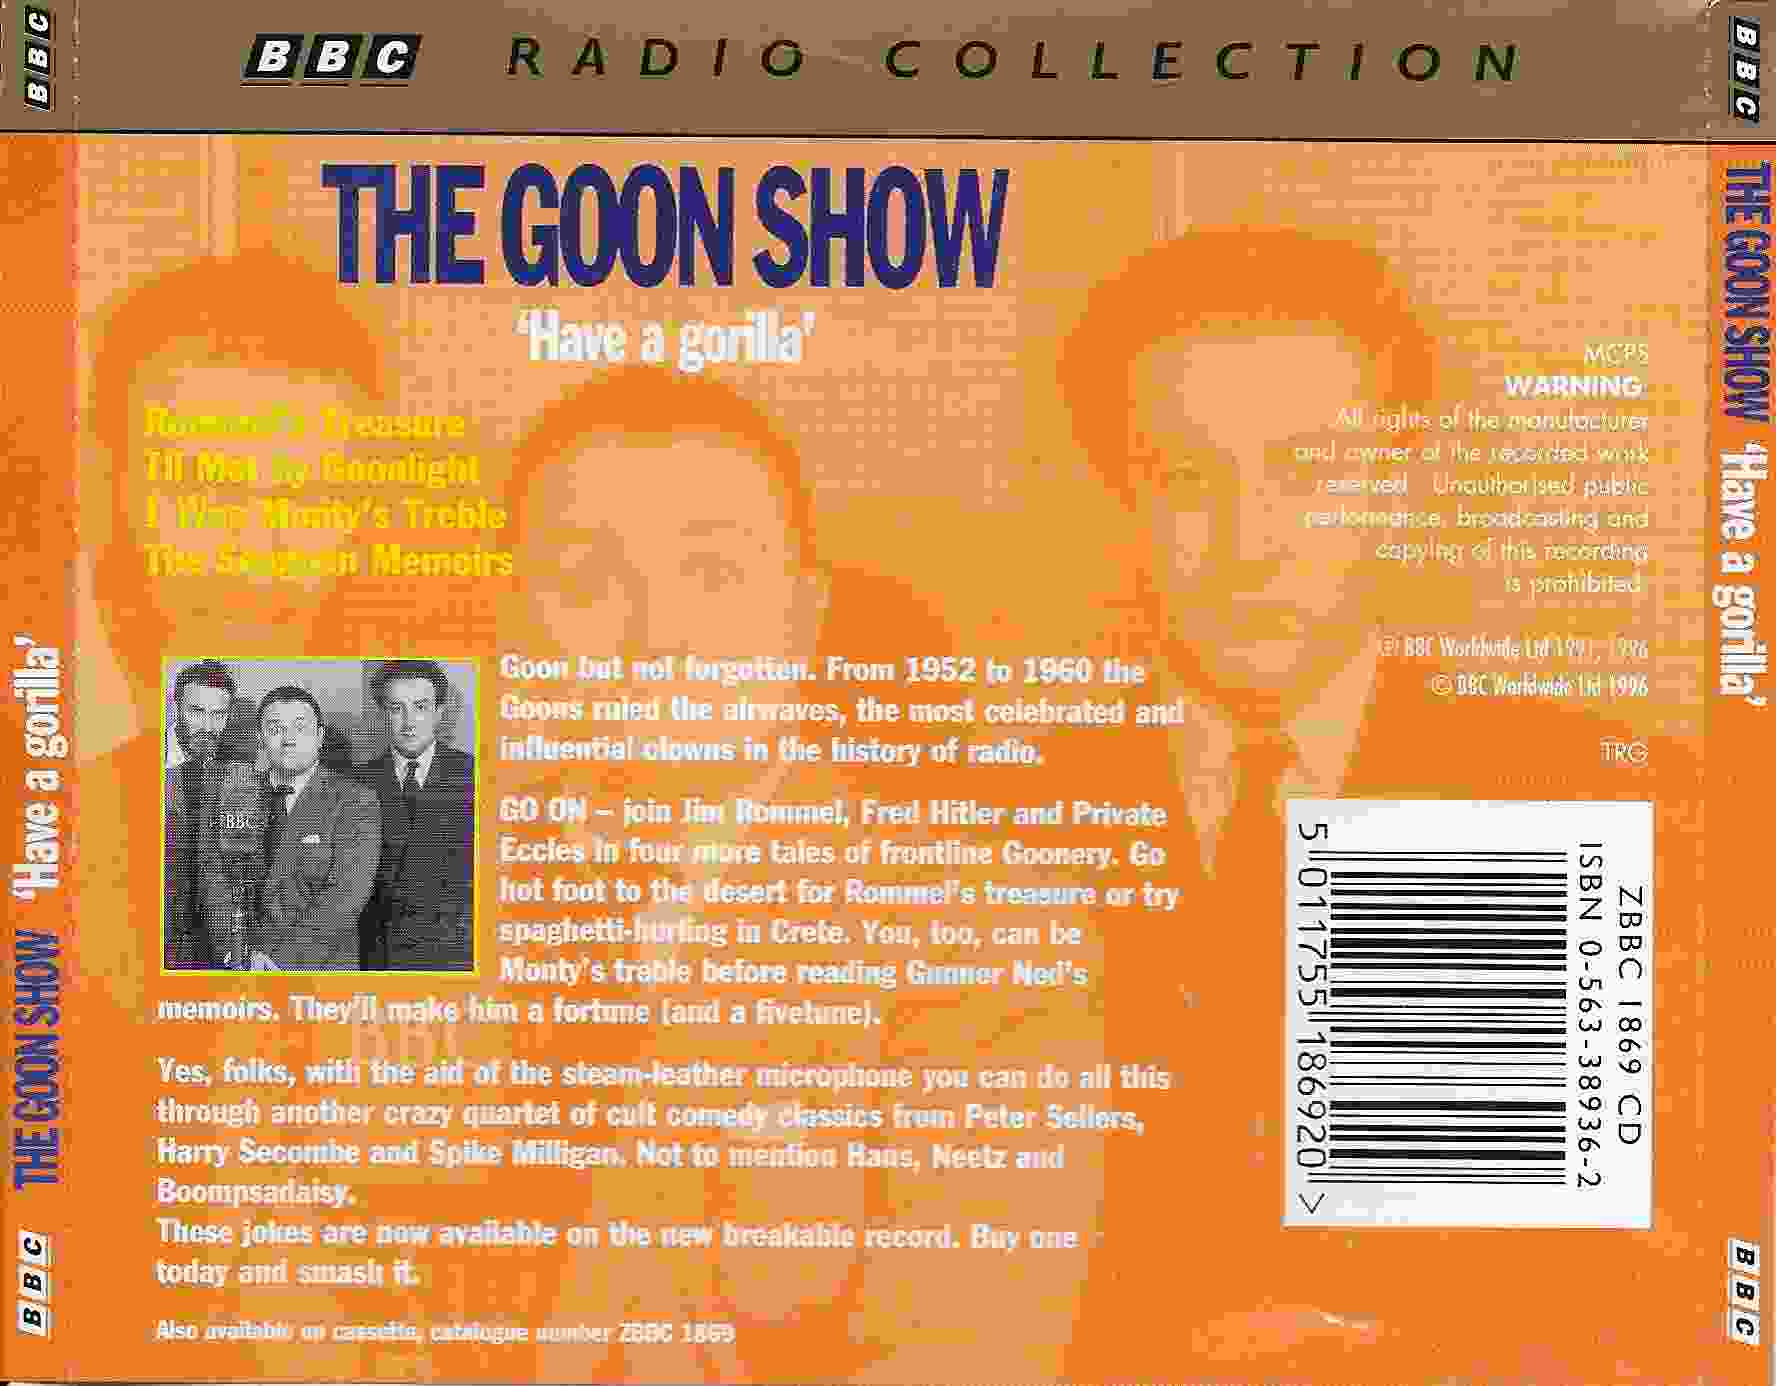 Picture of ZBBC 1869 CD The Goon show 6 - Have a gorilla by artist Spike Milligan / Larry Stephens / Maurice Wiltshire from the BBC records and Tapes library